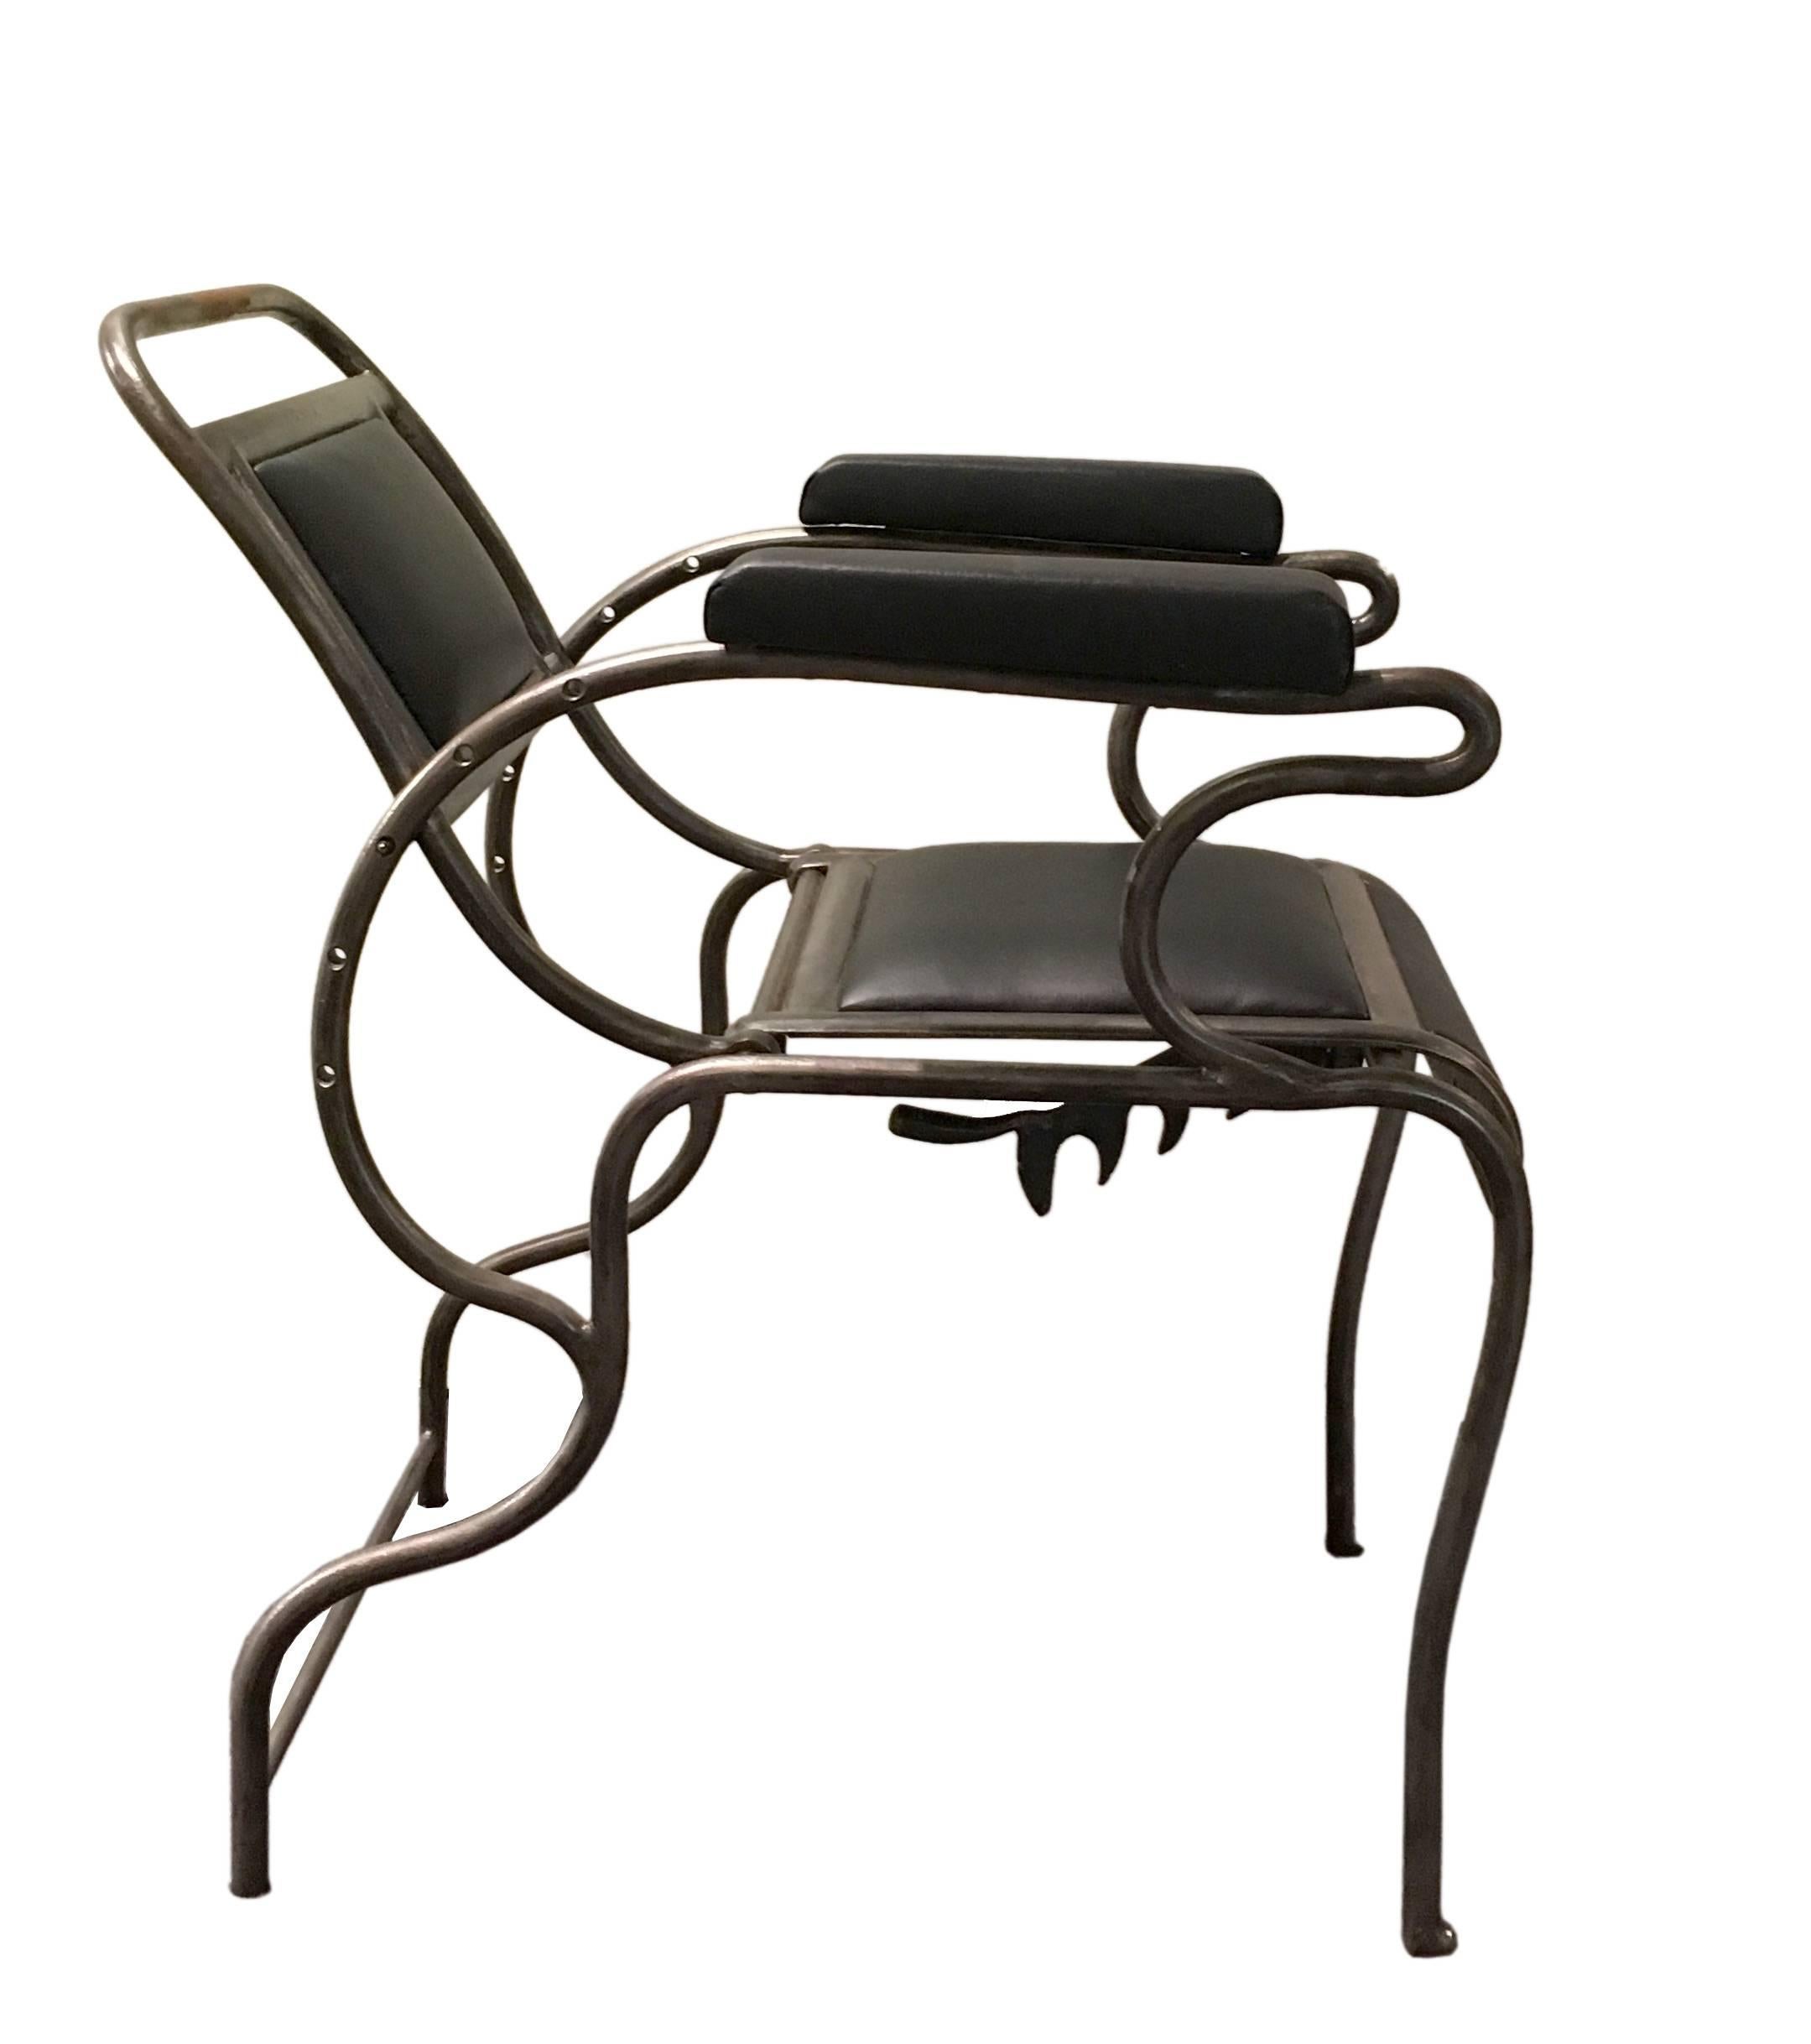 An unusual stainless steel  and black leather dentist’s armchair. A reclining backrest. Produced from A.S.ALOE COMPANY, St. Louis, MO – USA.